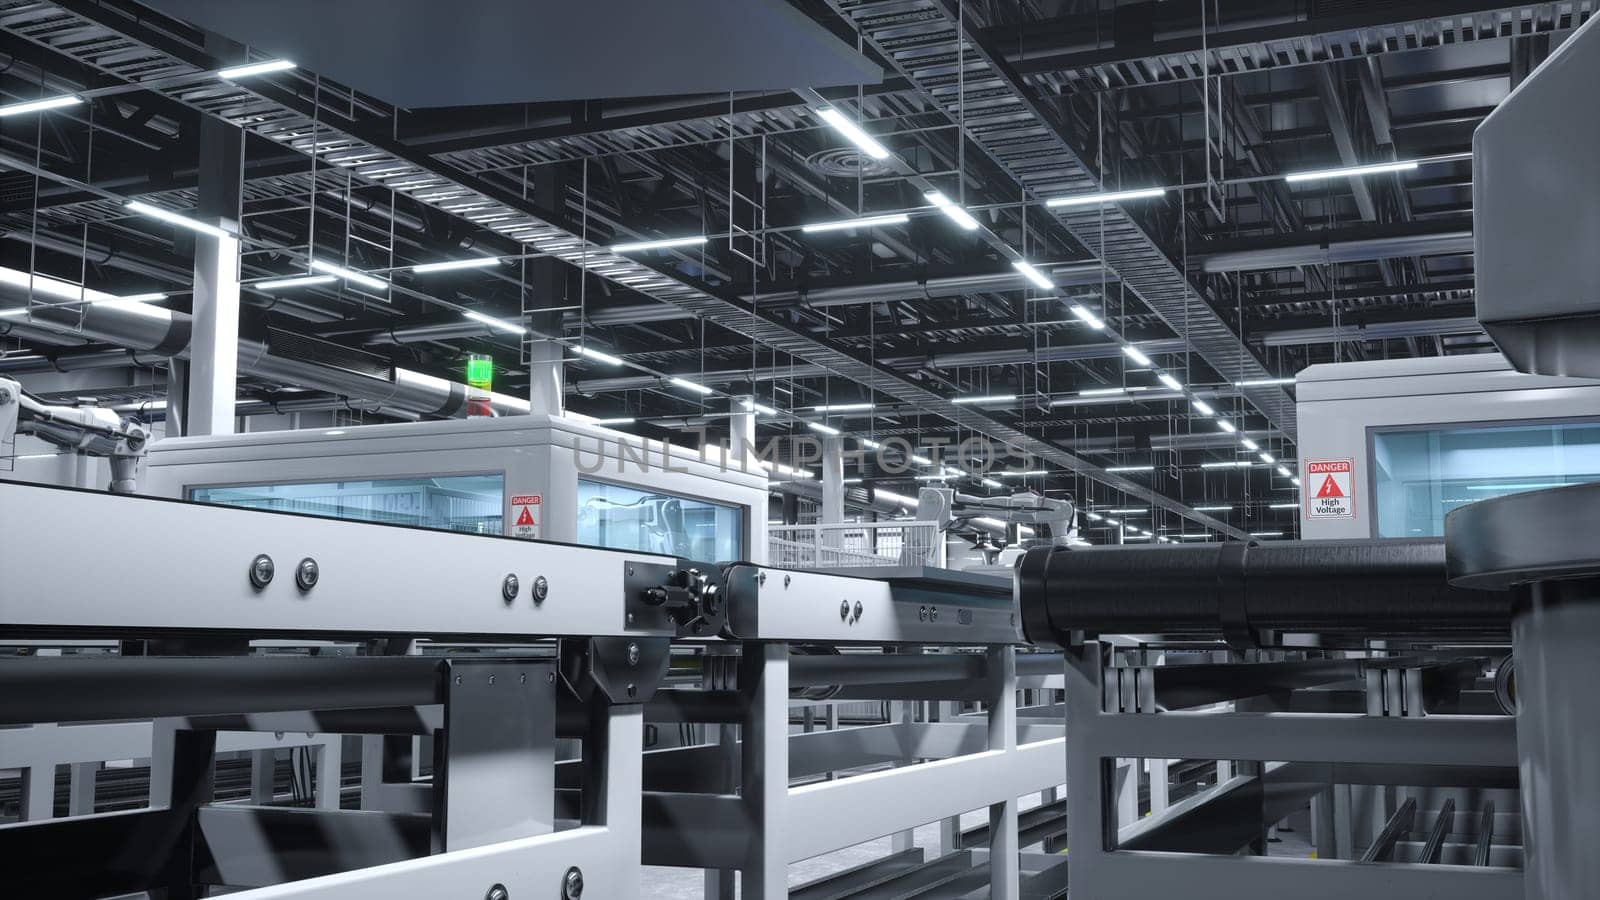 Solar panel factory with robotic arms placing PV modules on automation lines, 3D rendering of industrial building interior. Mass production facility producing solar cells for green energy industry